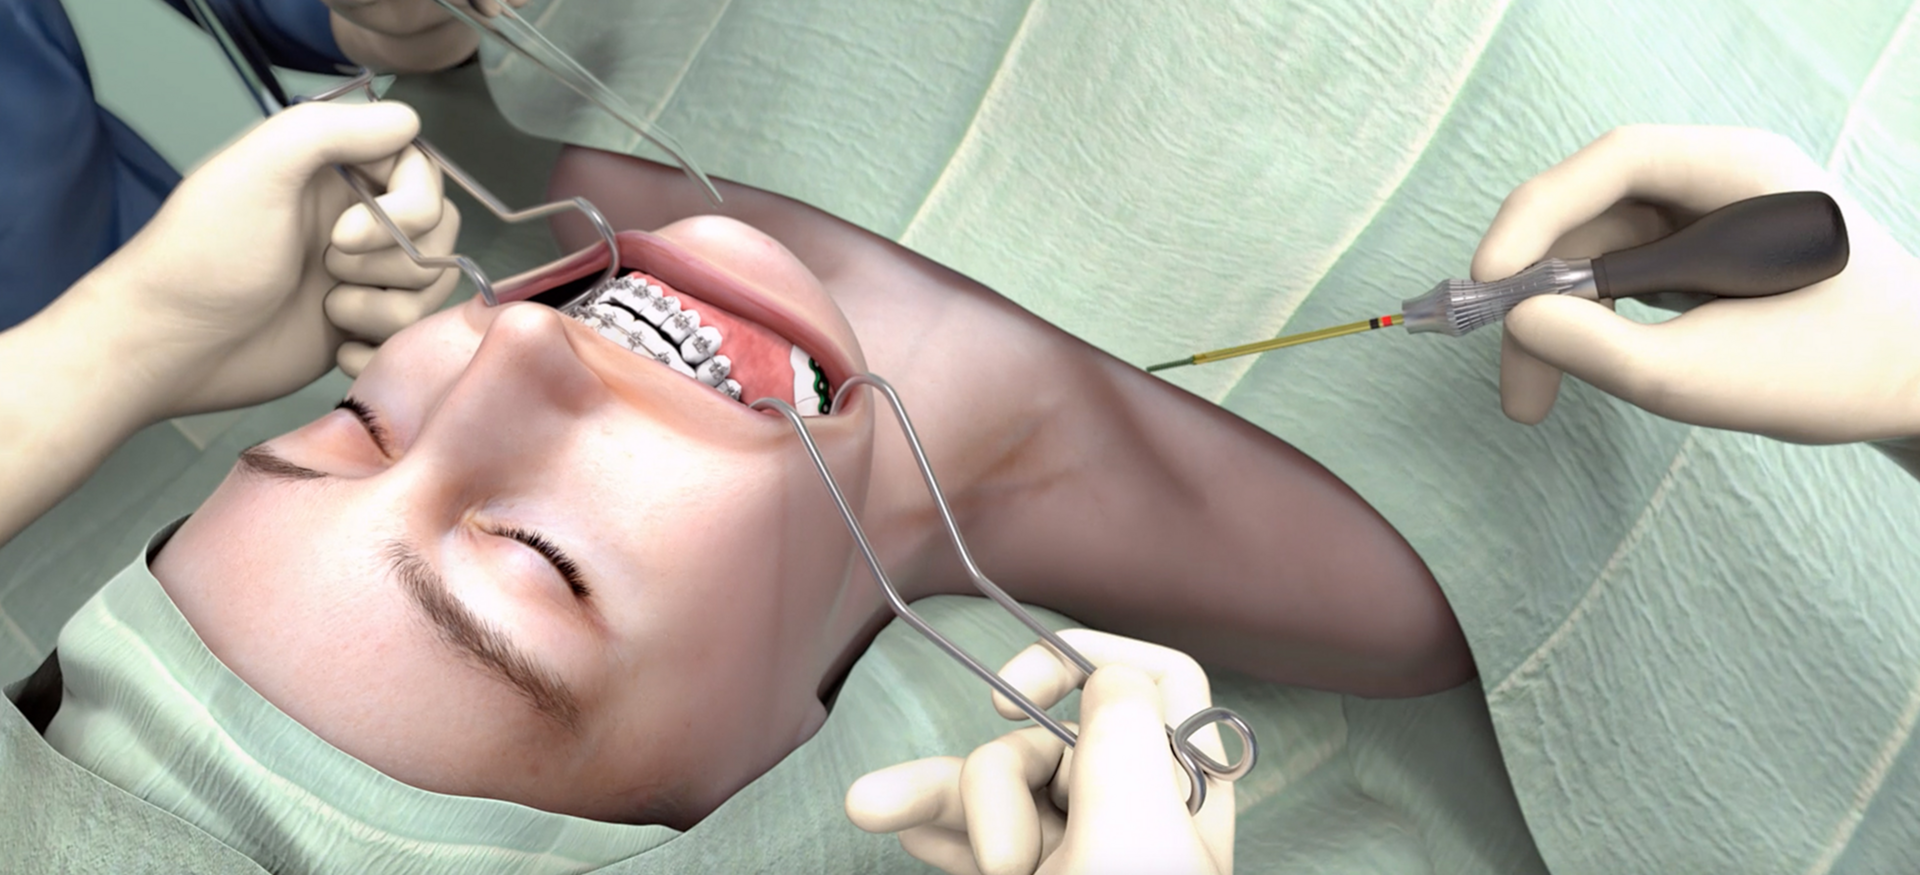 Photorealistic rendering of a surgery scene